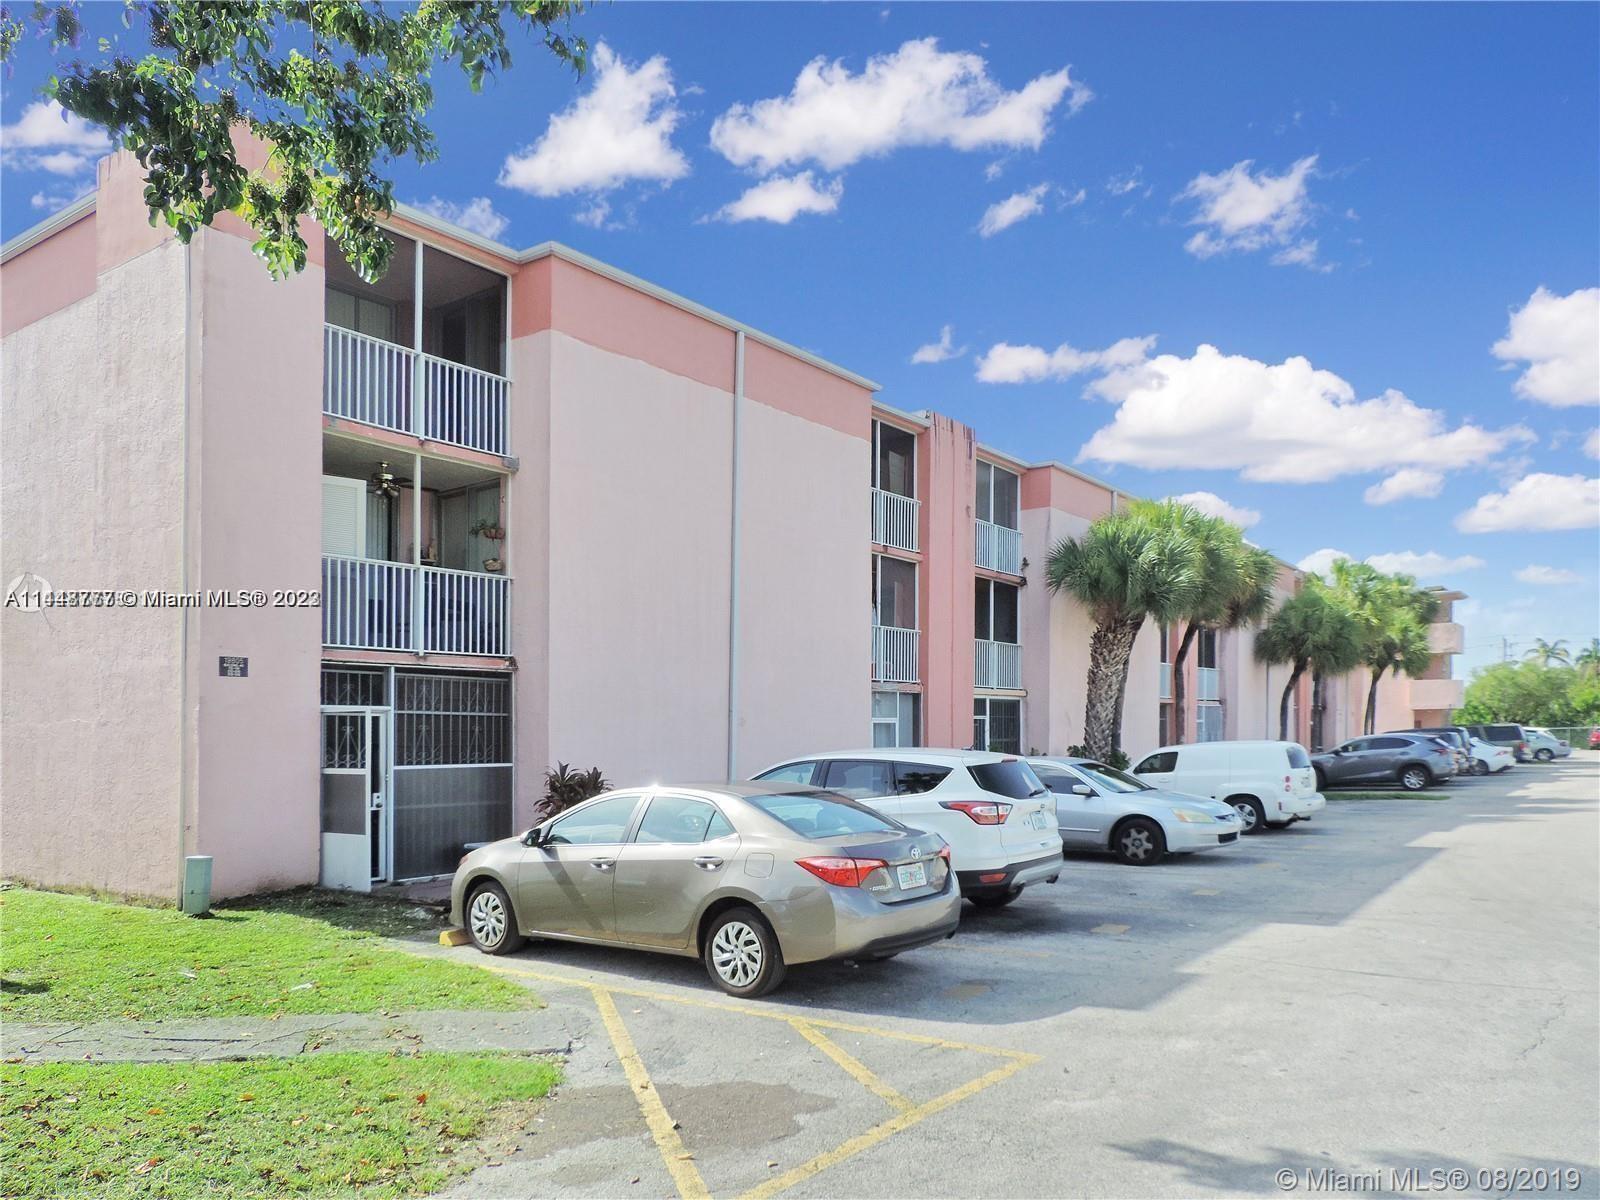 Great for investors 2/2 800 SQ FT, Tile throughout with a balcony and storage room west of US 1 high demand rental area. A+ tenants . SPECIAL ASSESSMENT 120.90 MONTHLY.